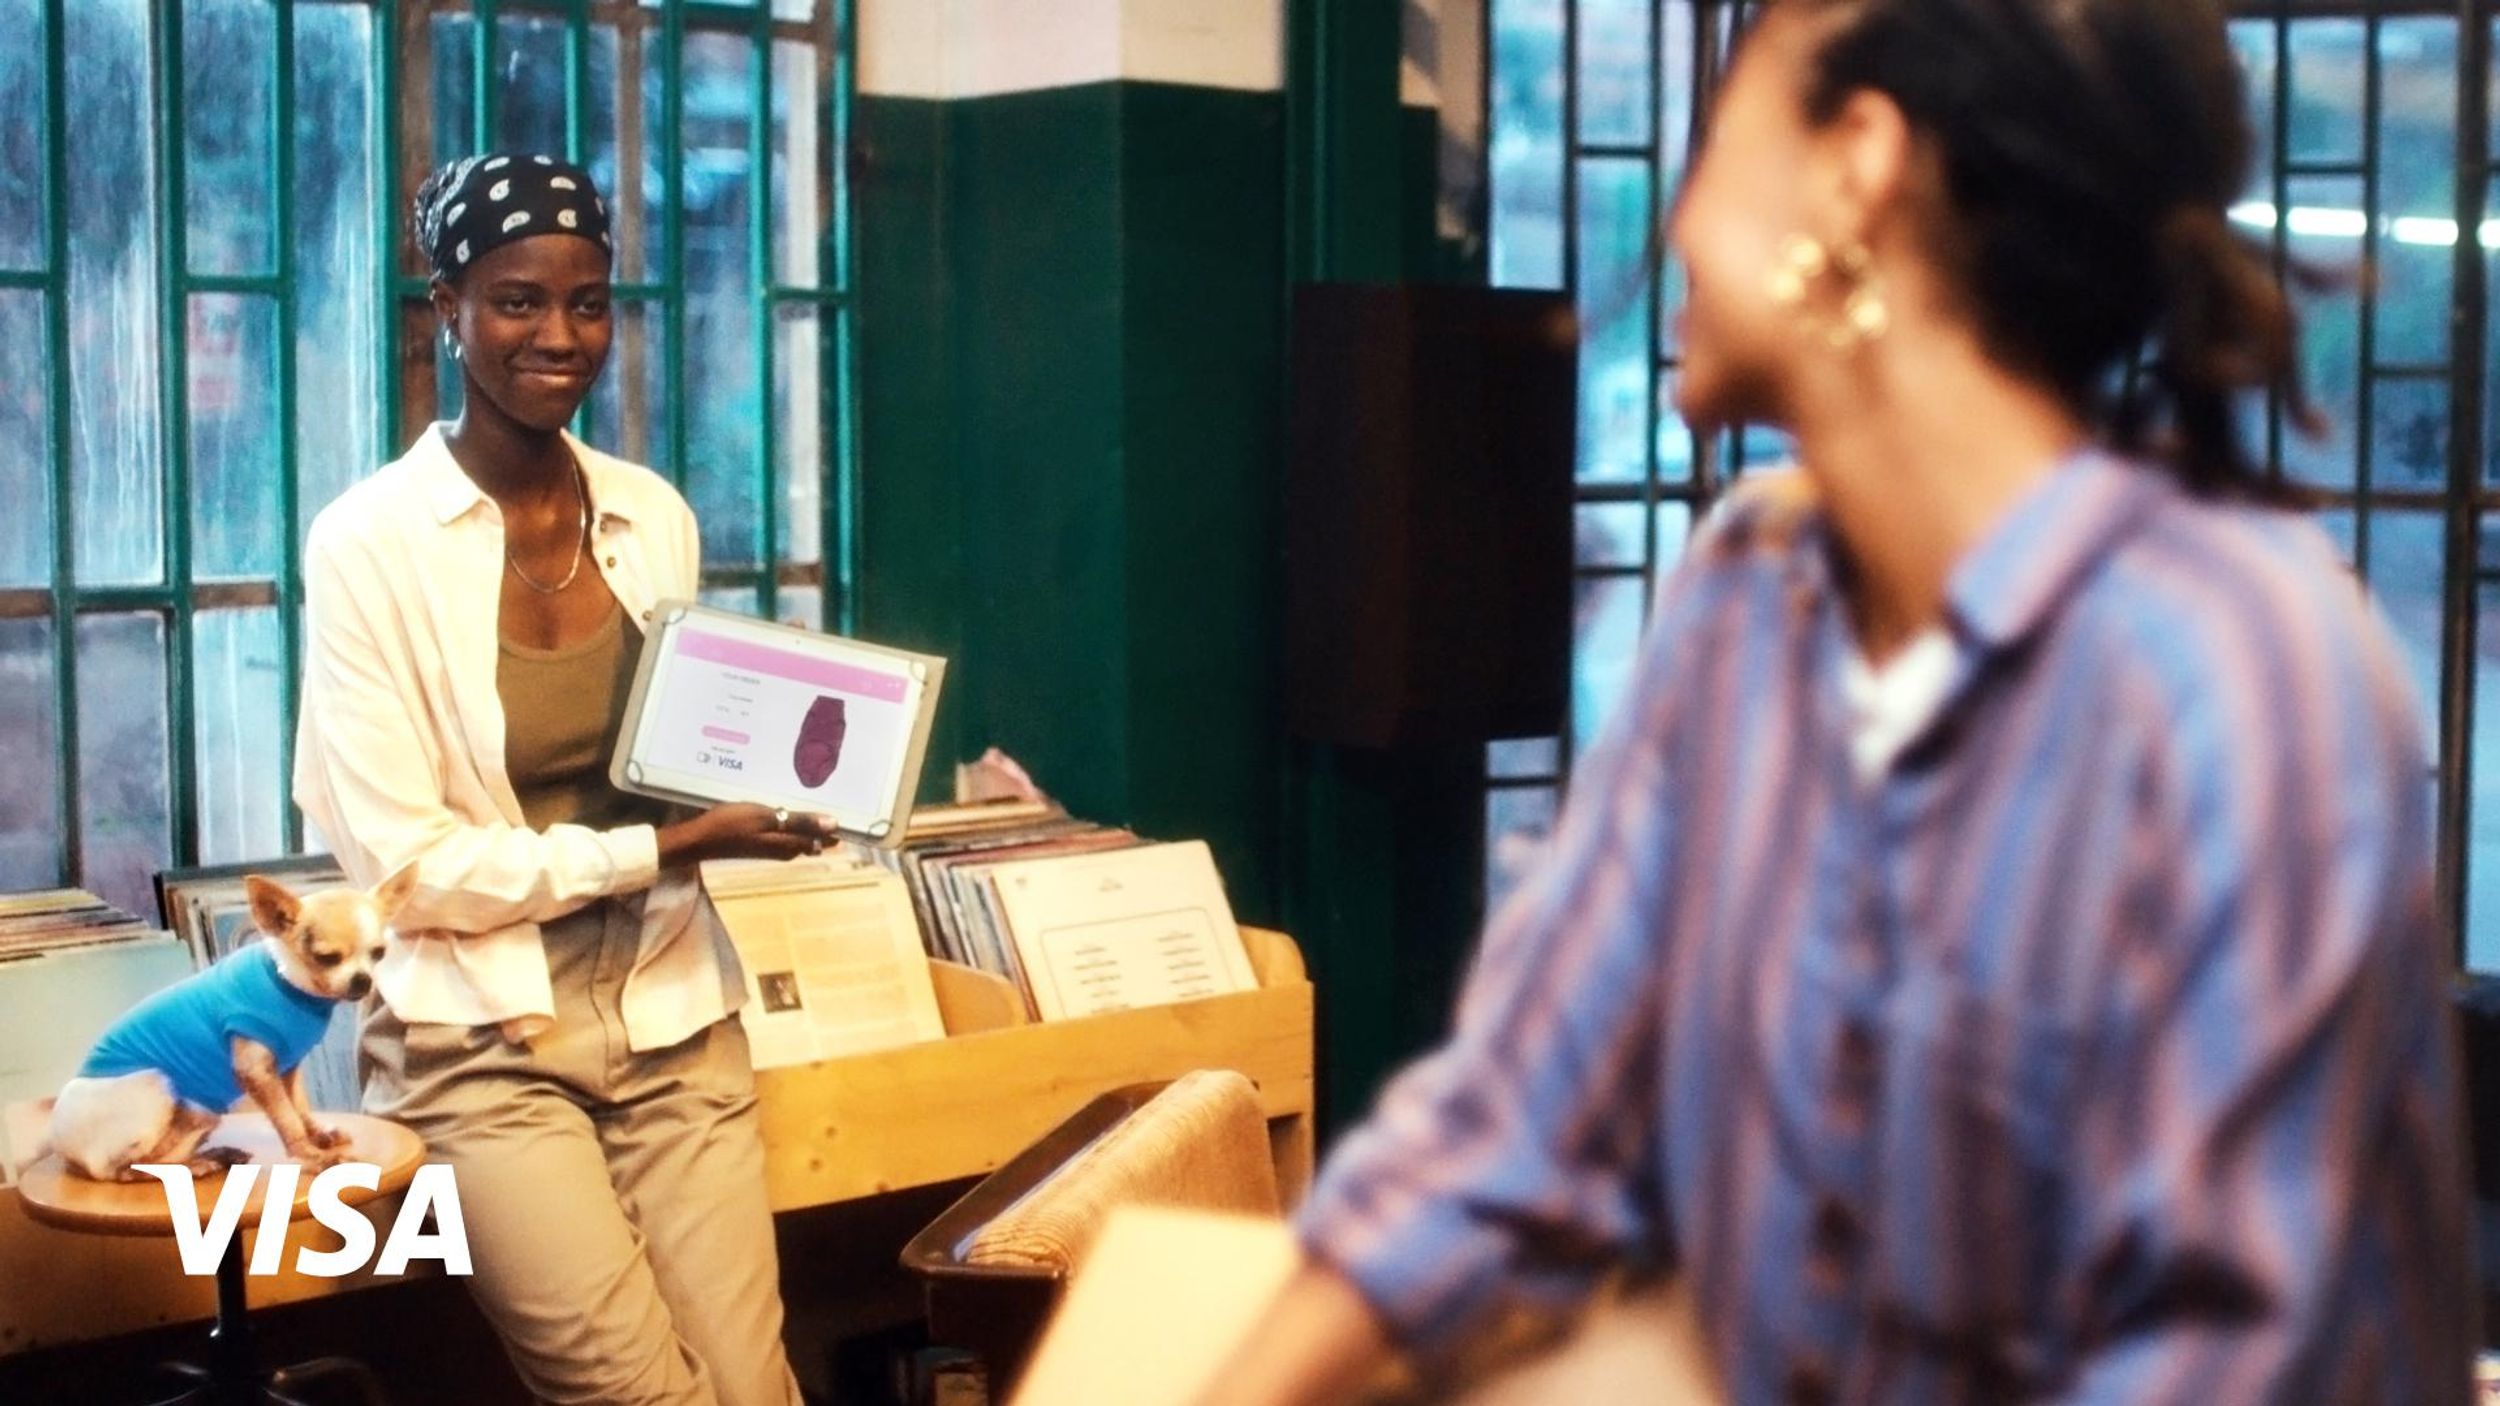 Two Black women looking at one another across a record store, one showing a screen displaying an online Visa purchase